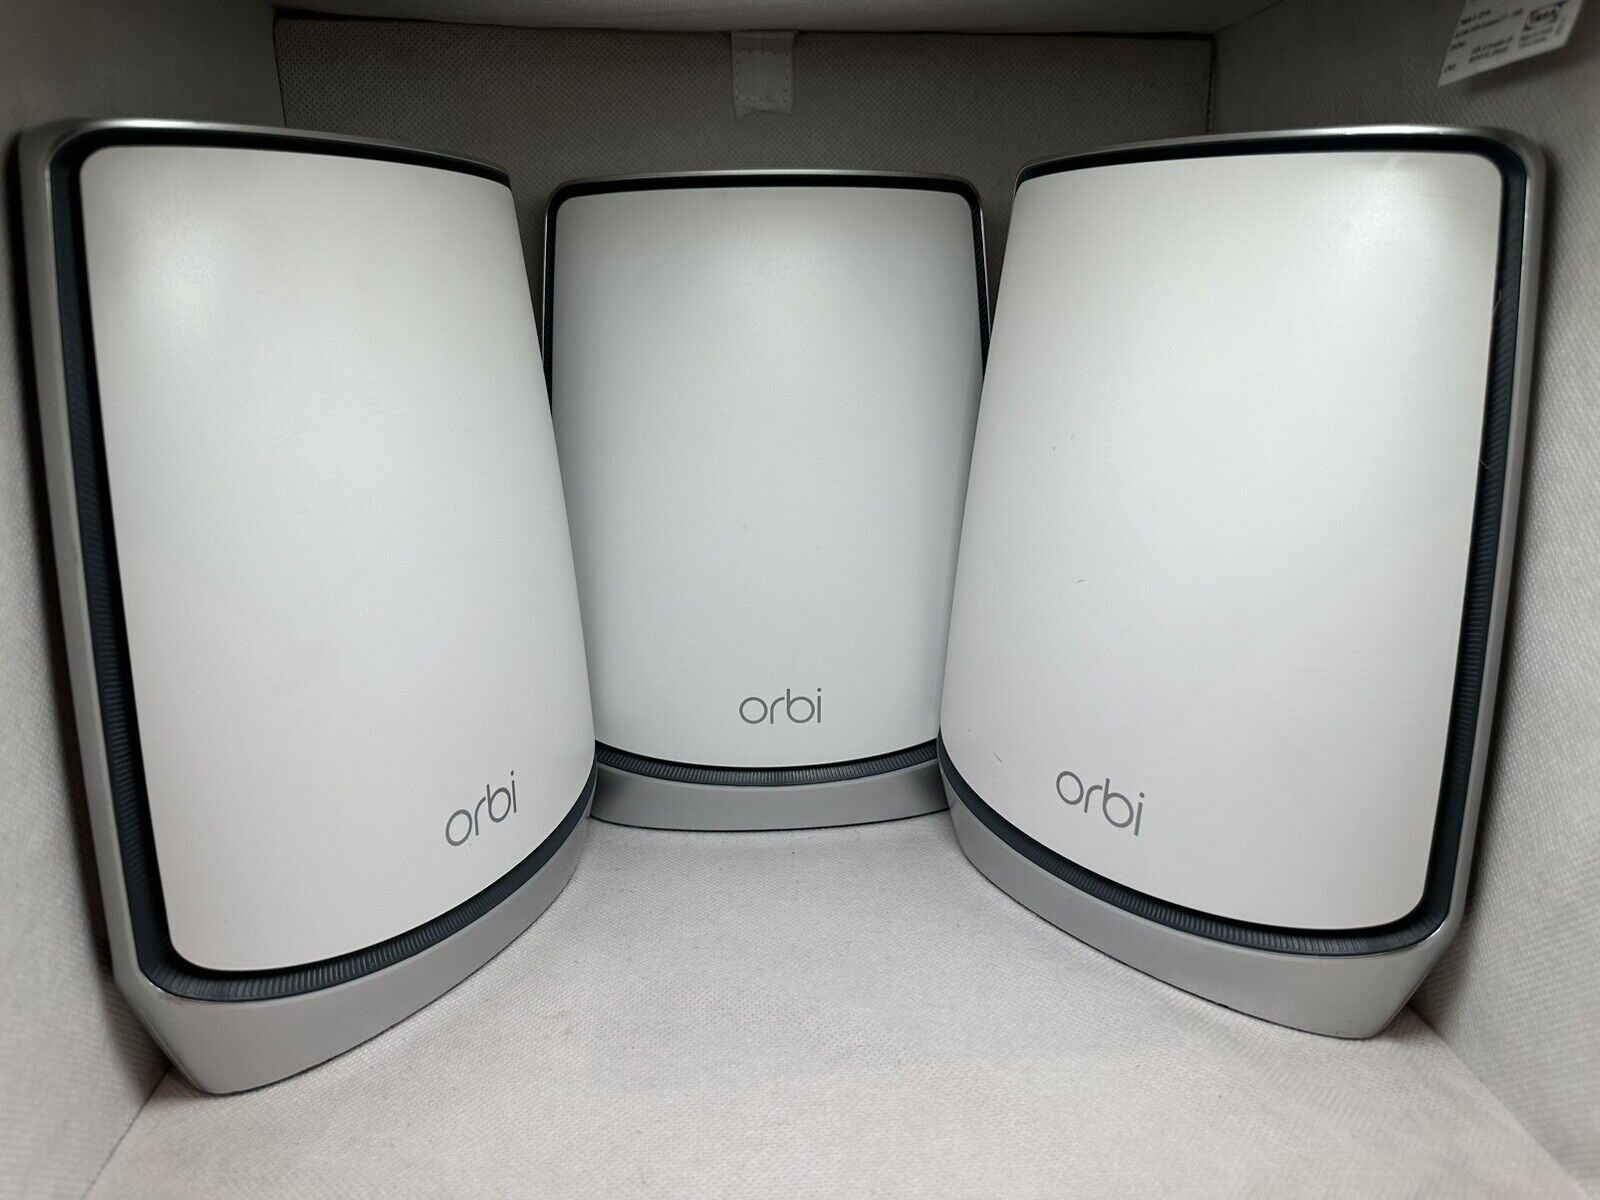 NETGEAR - Orbi 850 Series AX6000 Tri-Band Mesh Wi-Fi 6 System TESTED and Reset